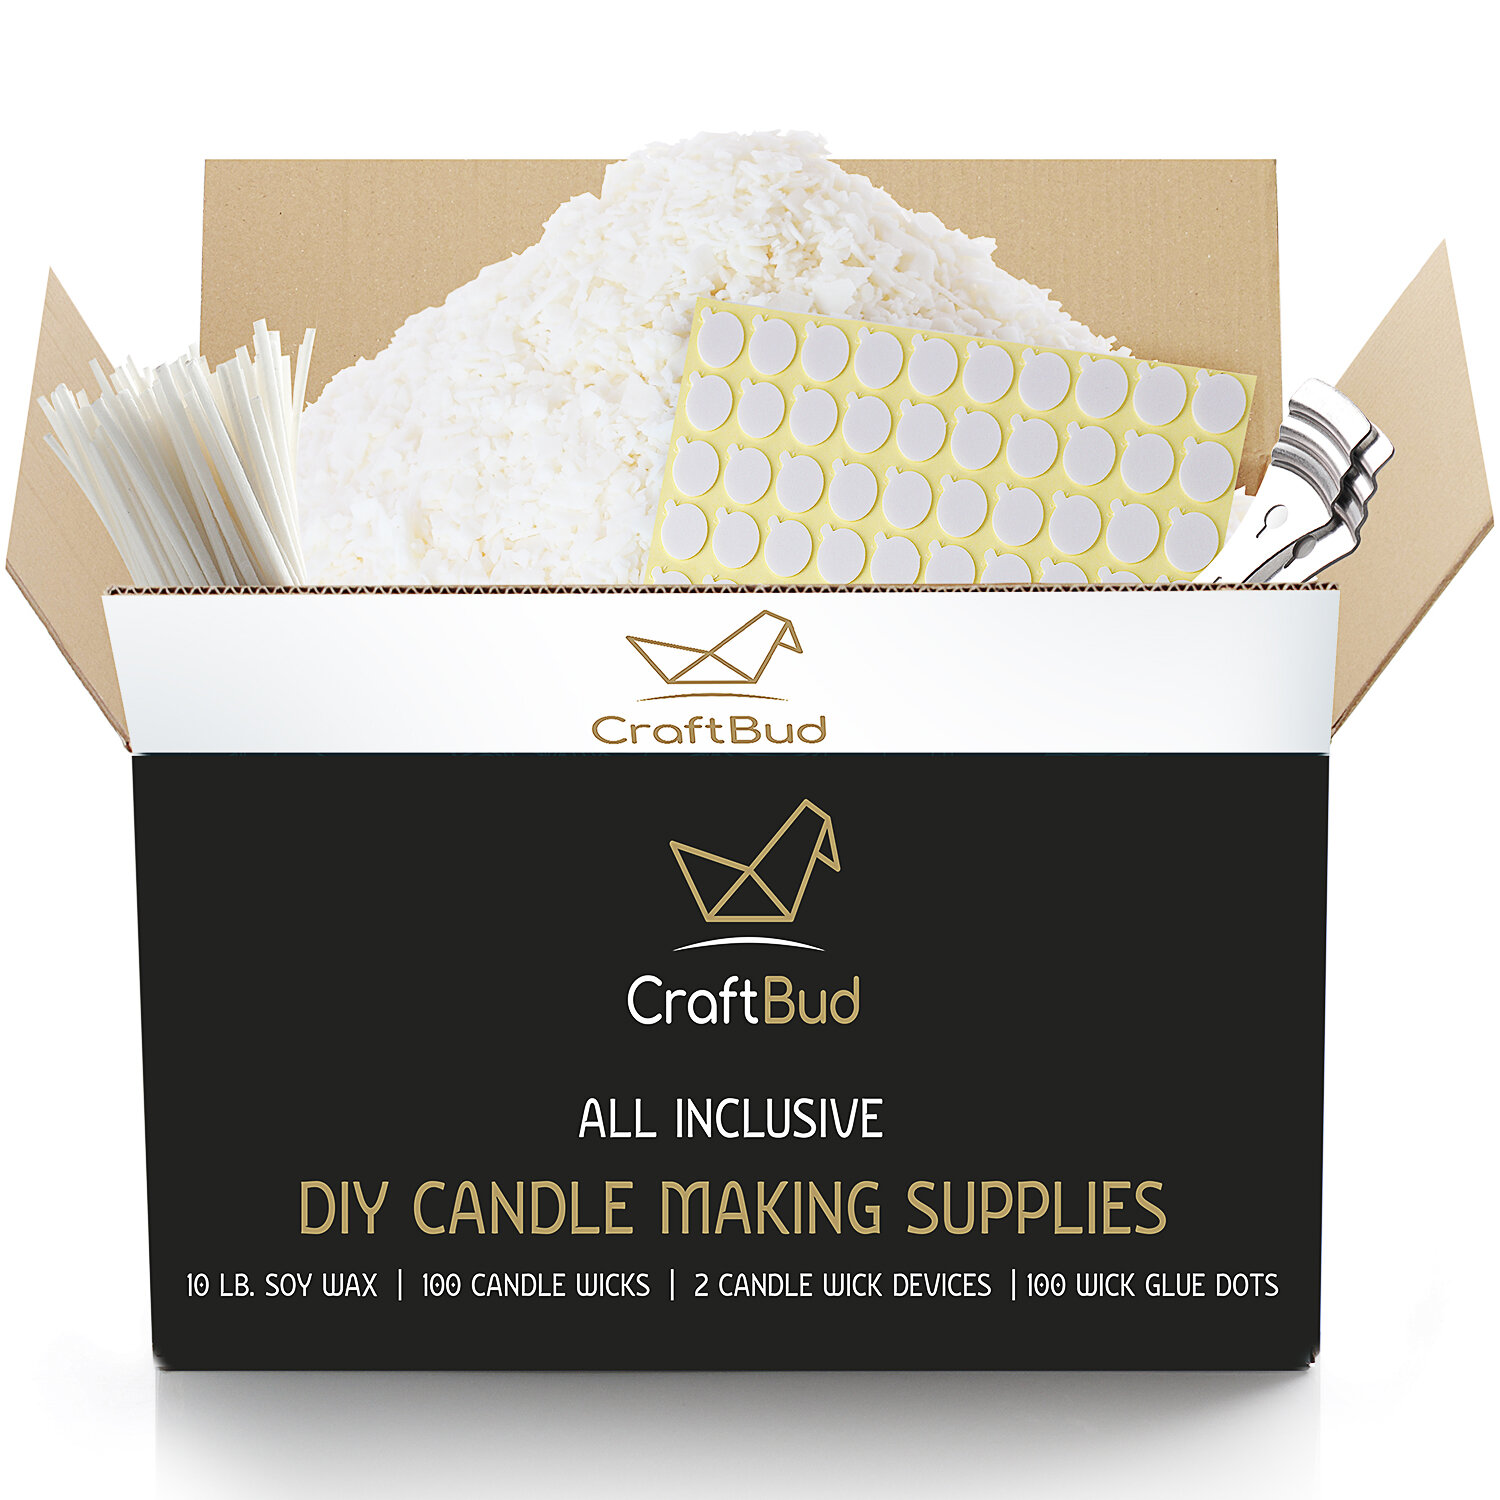 Candle Kit with Soy Wax Flakes for Candle Making CraftBud Candle Making Kit for Adults and Kids with 10 LBs Soy Candle Wax Flakes Full DIY Candle Making Kit with All Candle Making Supplies 